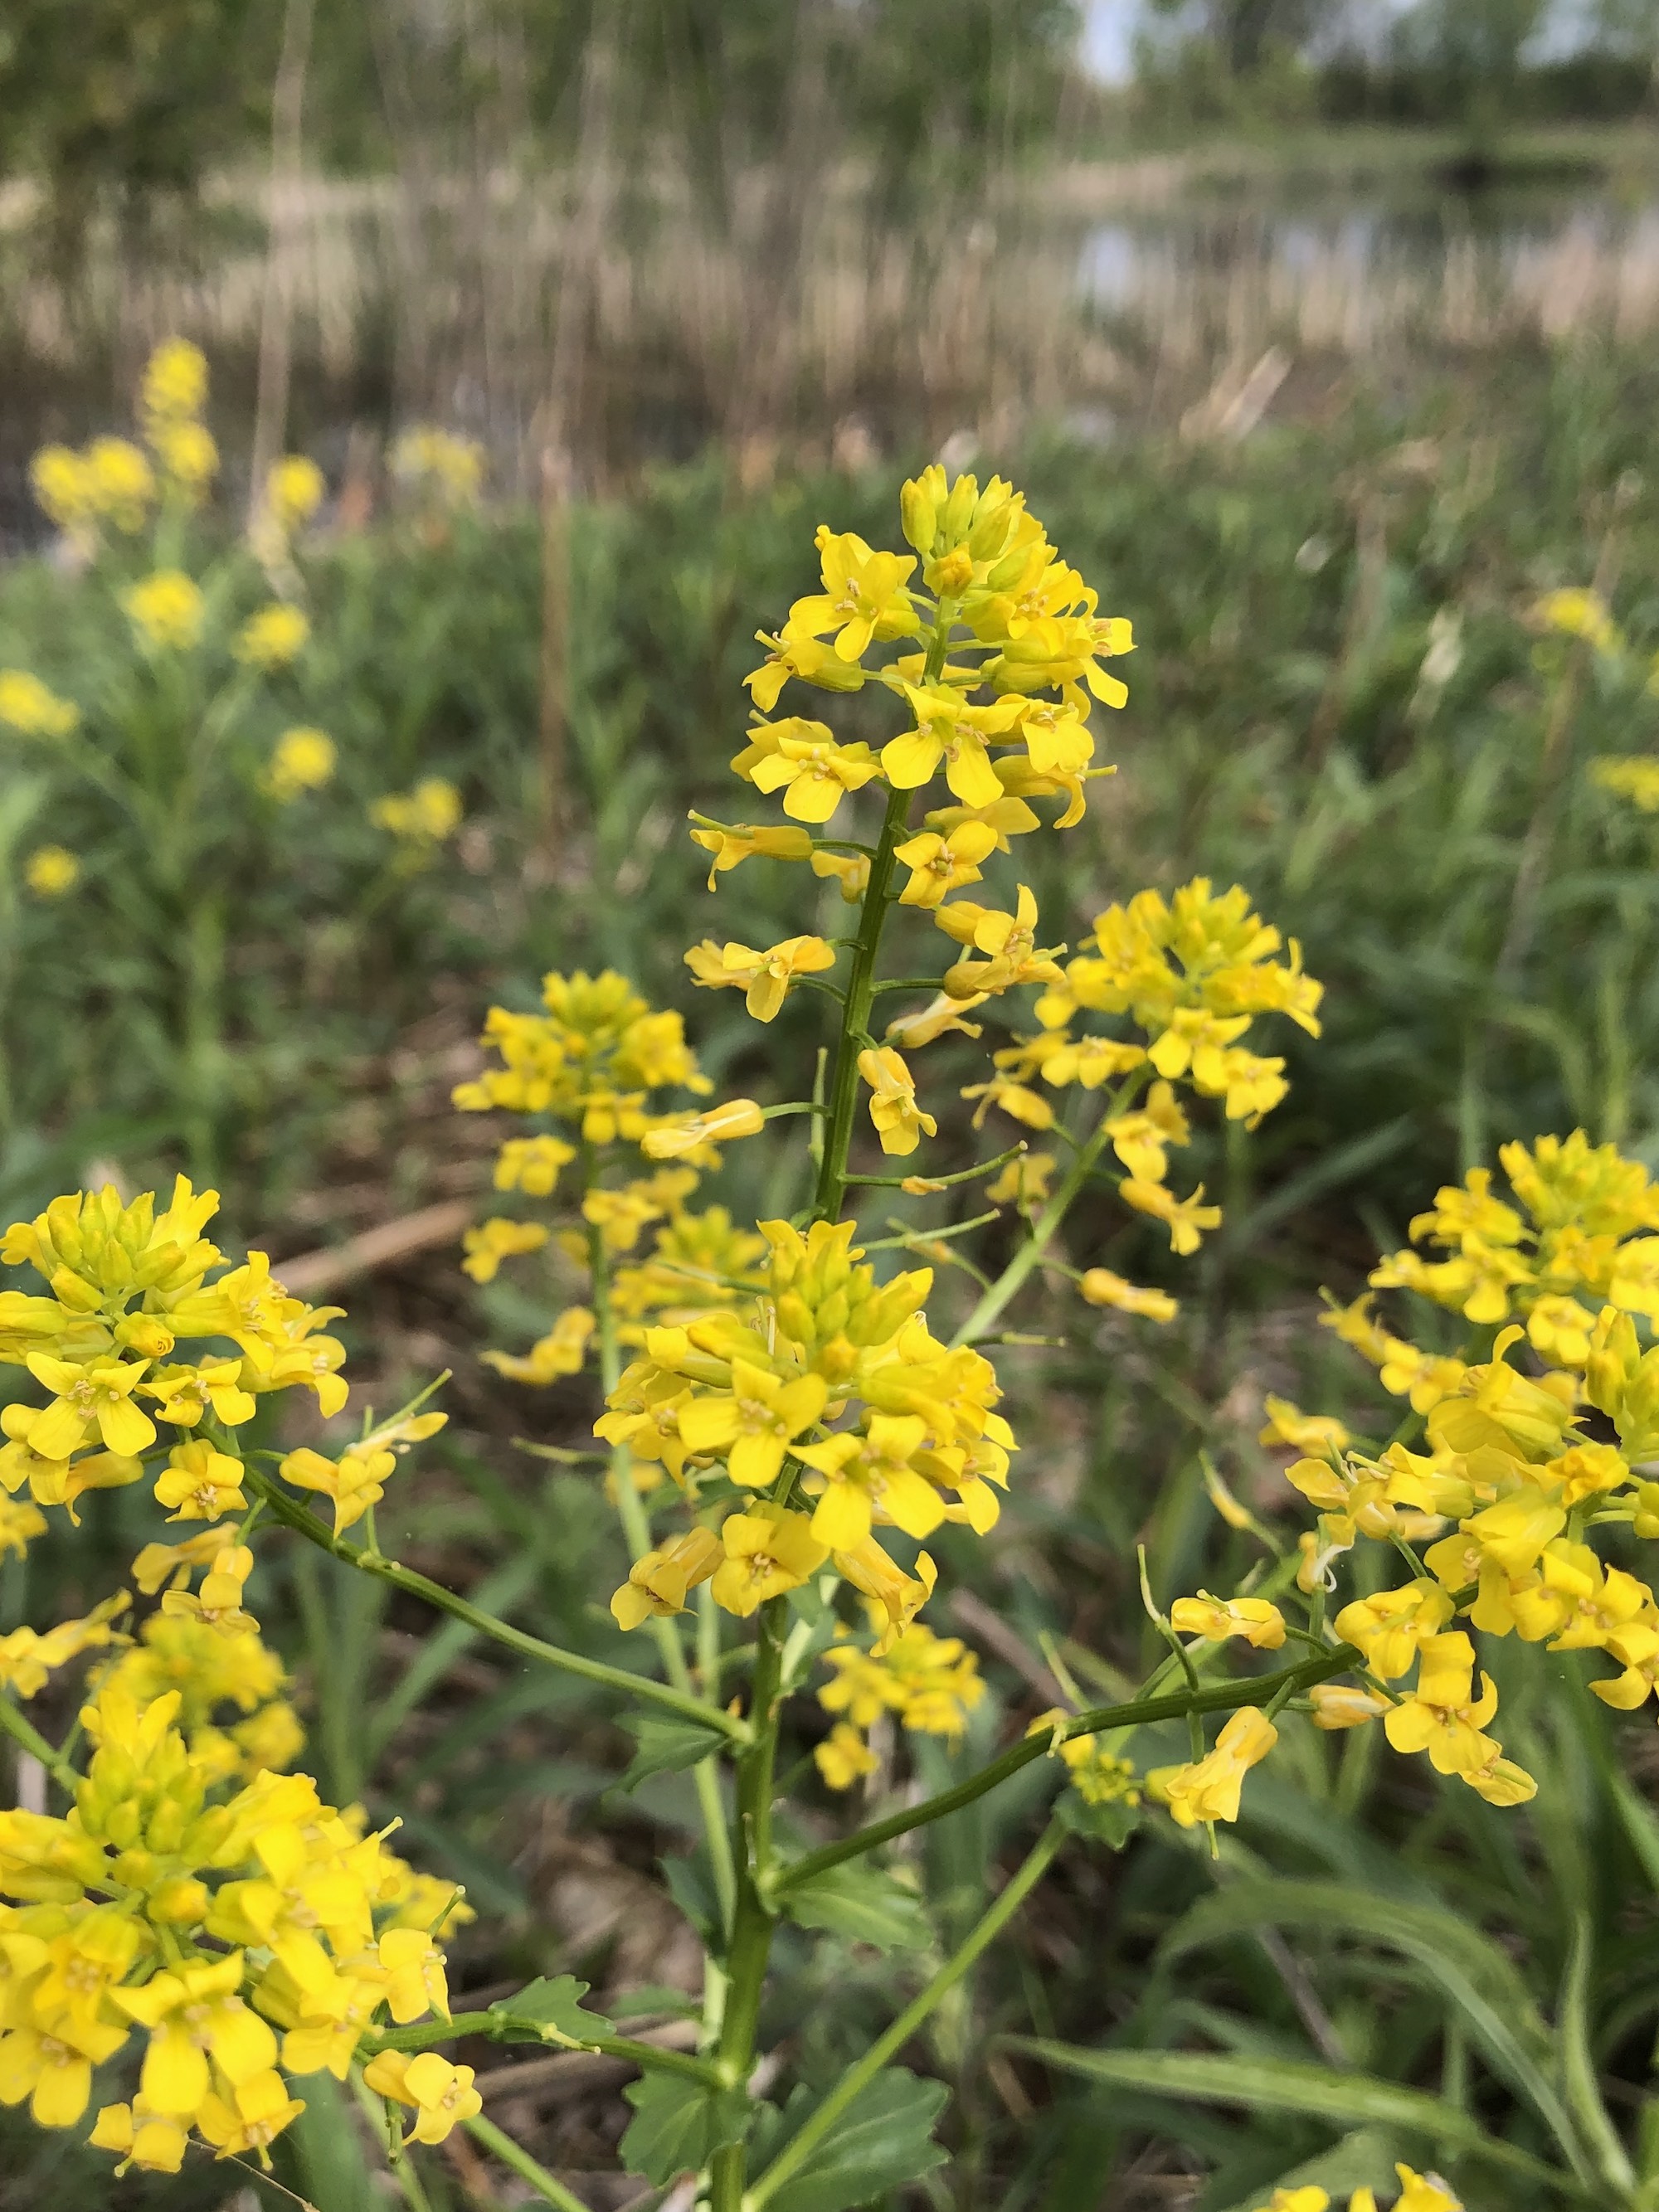 Garden Yellow Rocket in Marion Dunn prairie in Madison, Wisconsin on May 4, 2021.